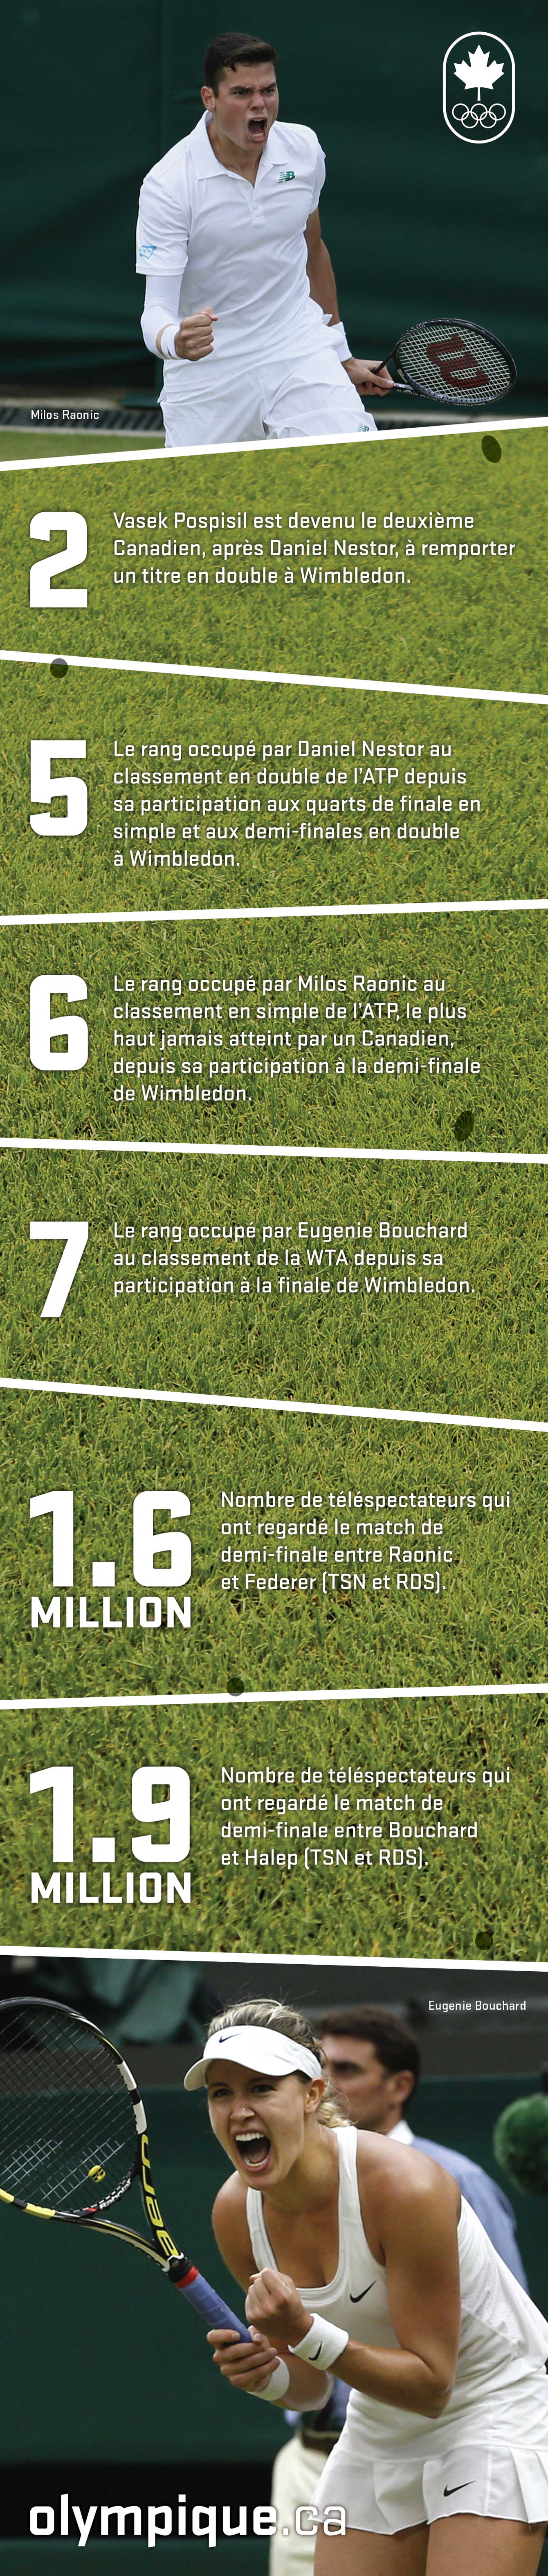 Infographic_FR